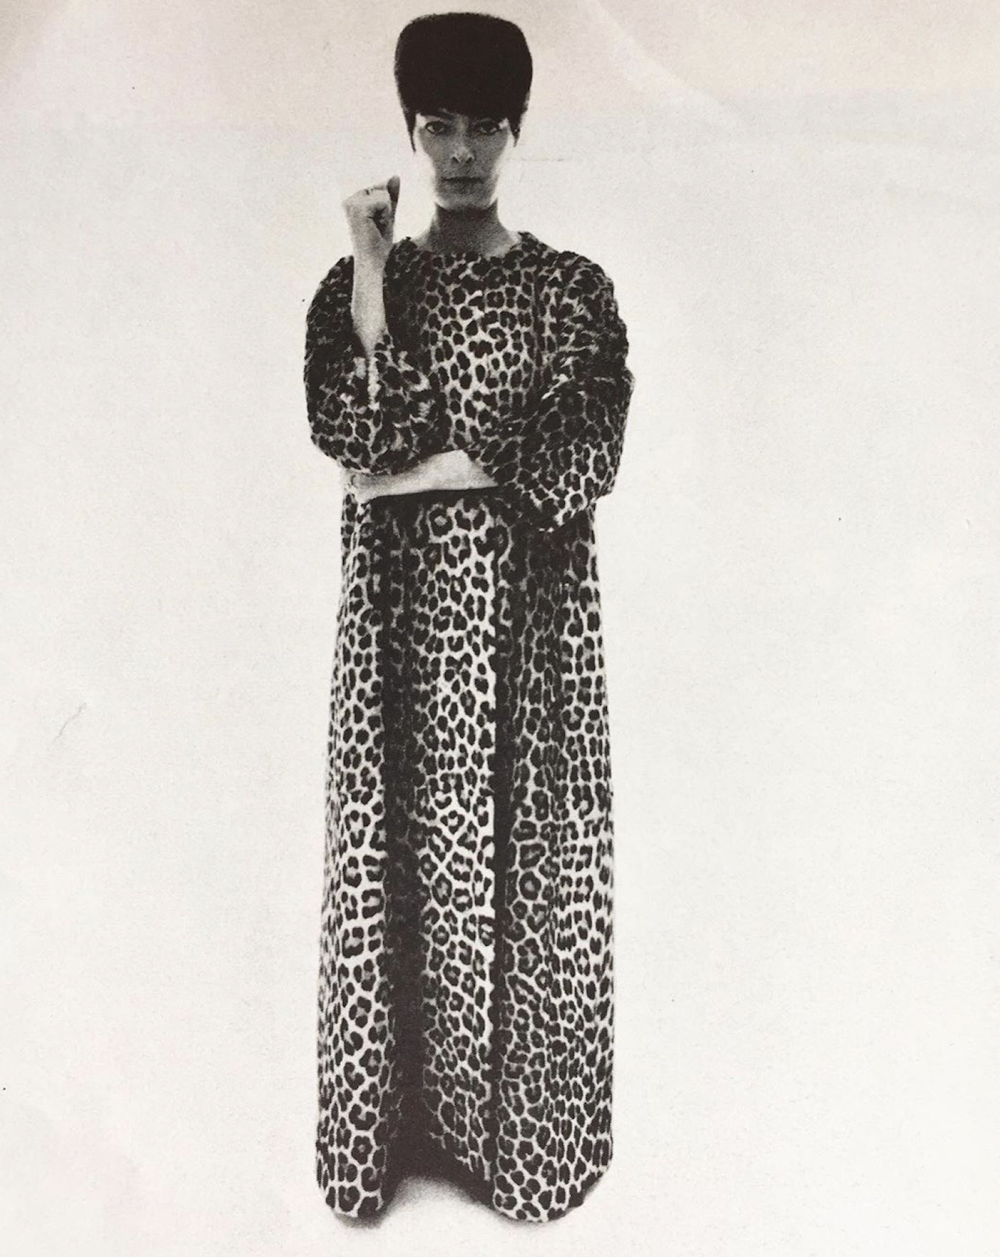 Annabel buffet in balenciaga s long panther hostess dress photographed by william klein